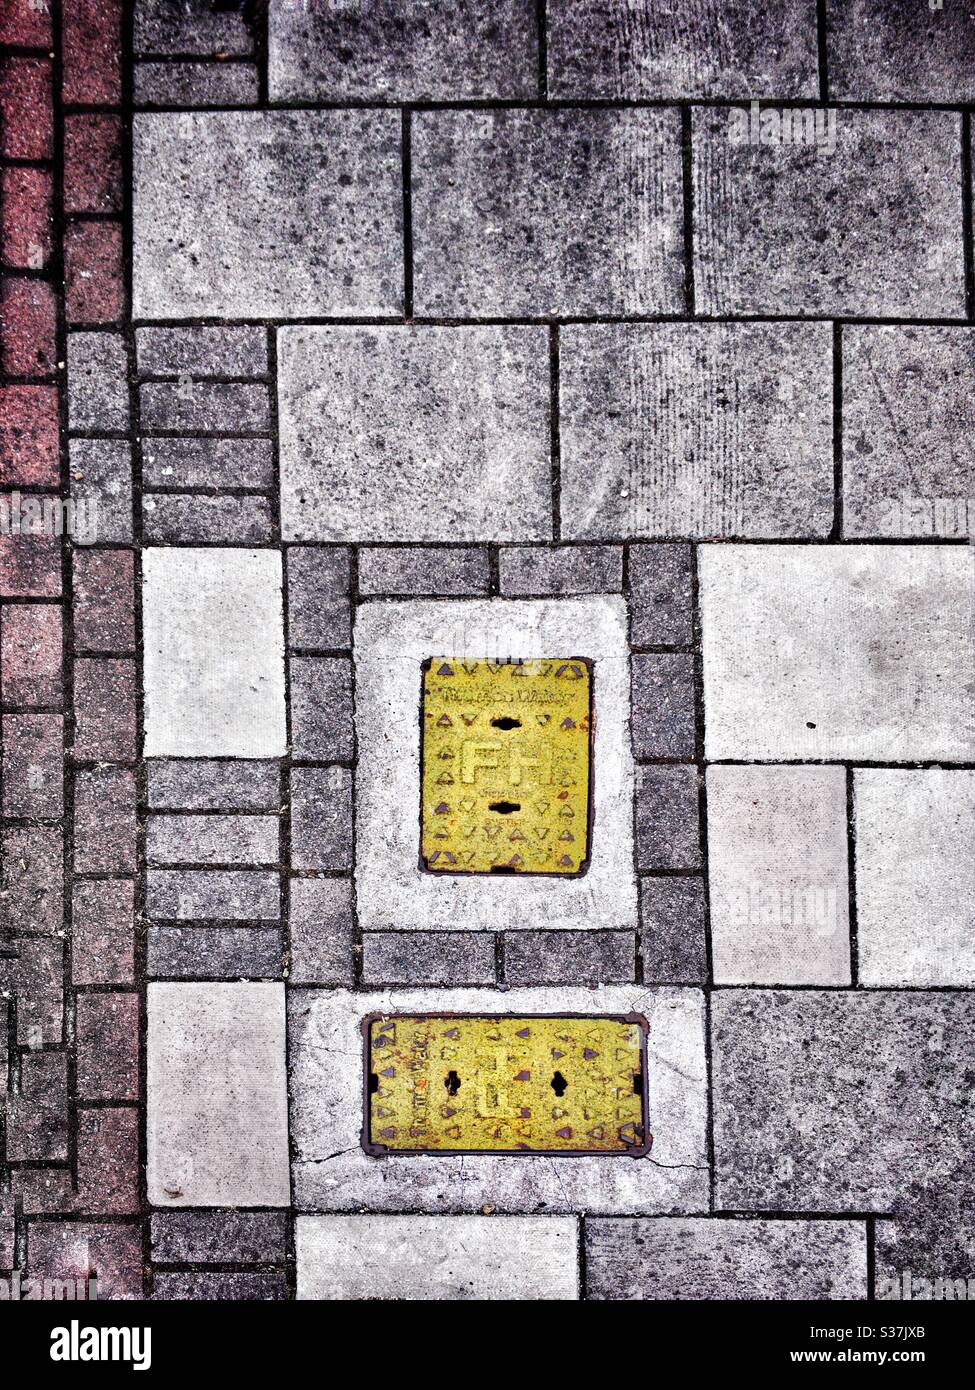 Two painted metal panels a pavement. The yellow stands out boldly against the greys and faded pinks of the paving stones and bricks. Fascinating pattern of squares and rectangles. Beautiful grunge. Stock Photo